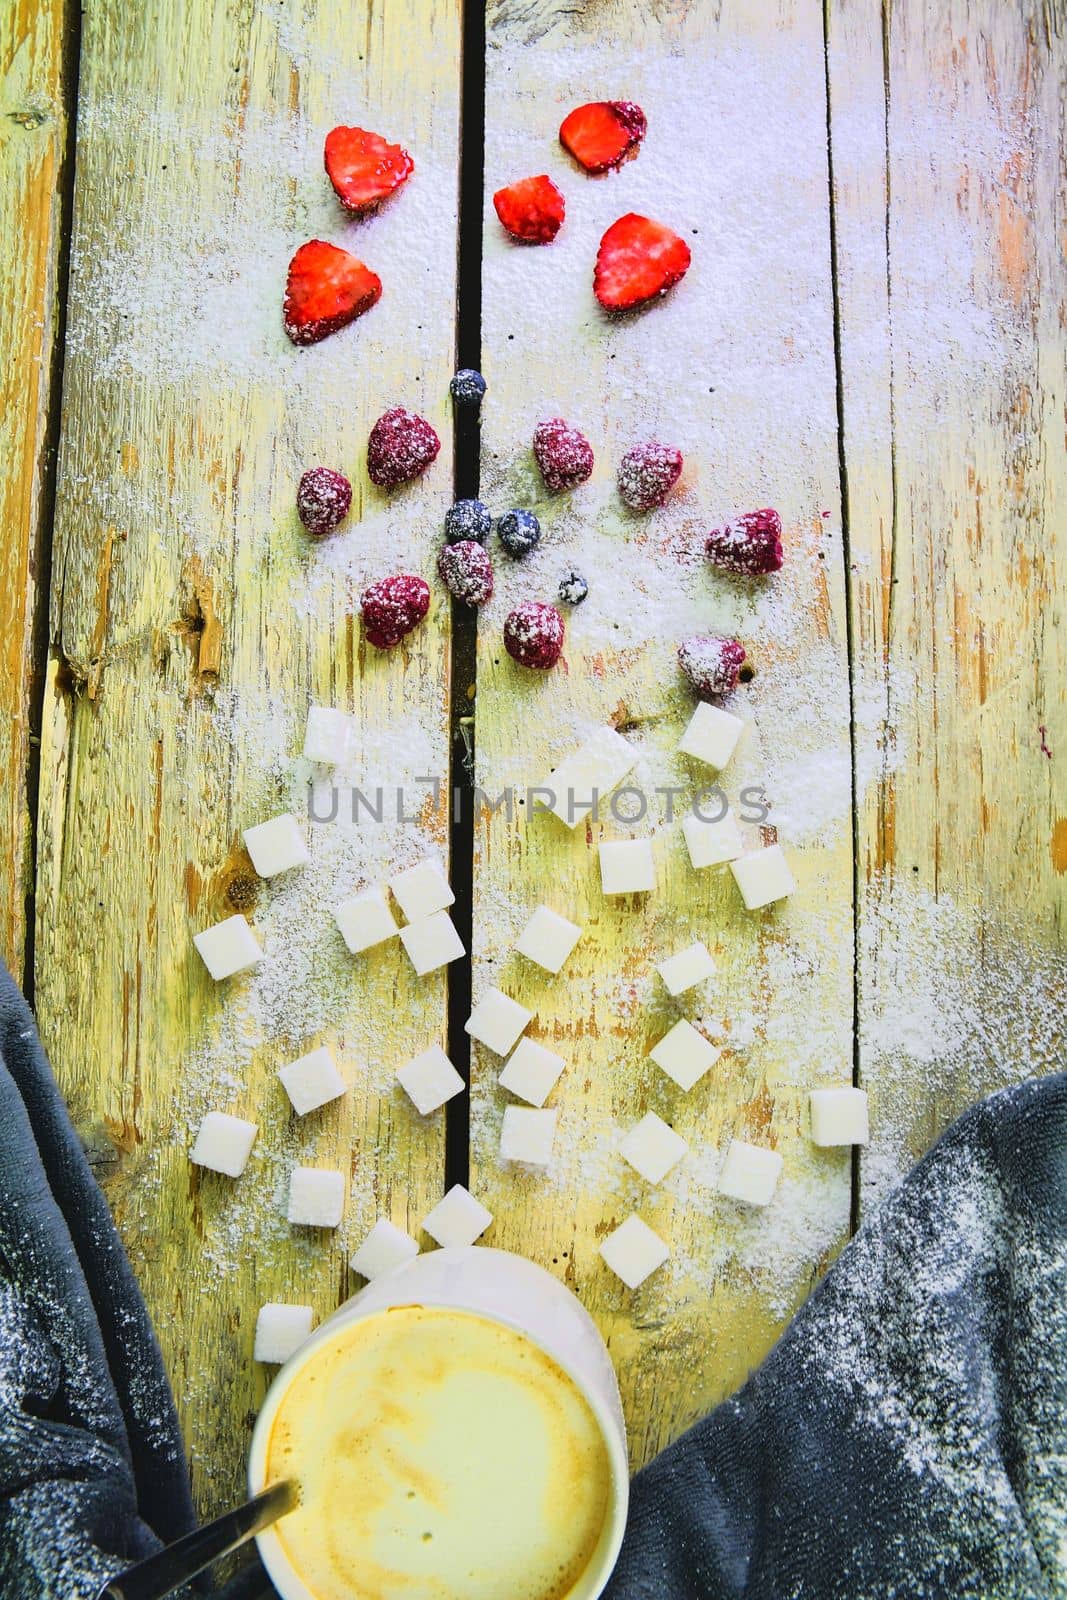 Cup of coffee, sugar cubes, blueberries and strawberries on wooden background. Winter or Valentines day concept. Flat design, flat lay, top view.